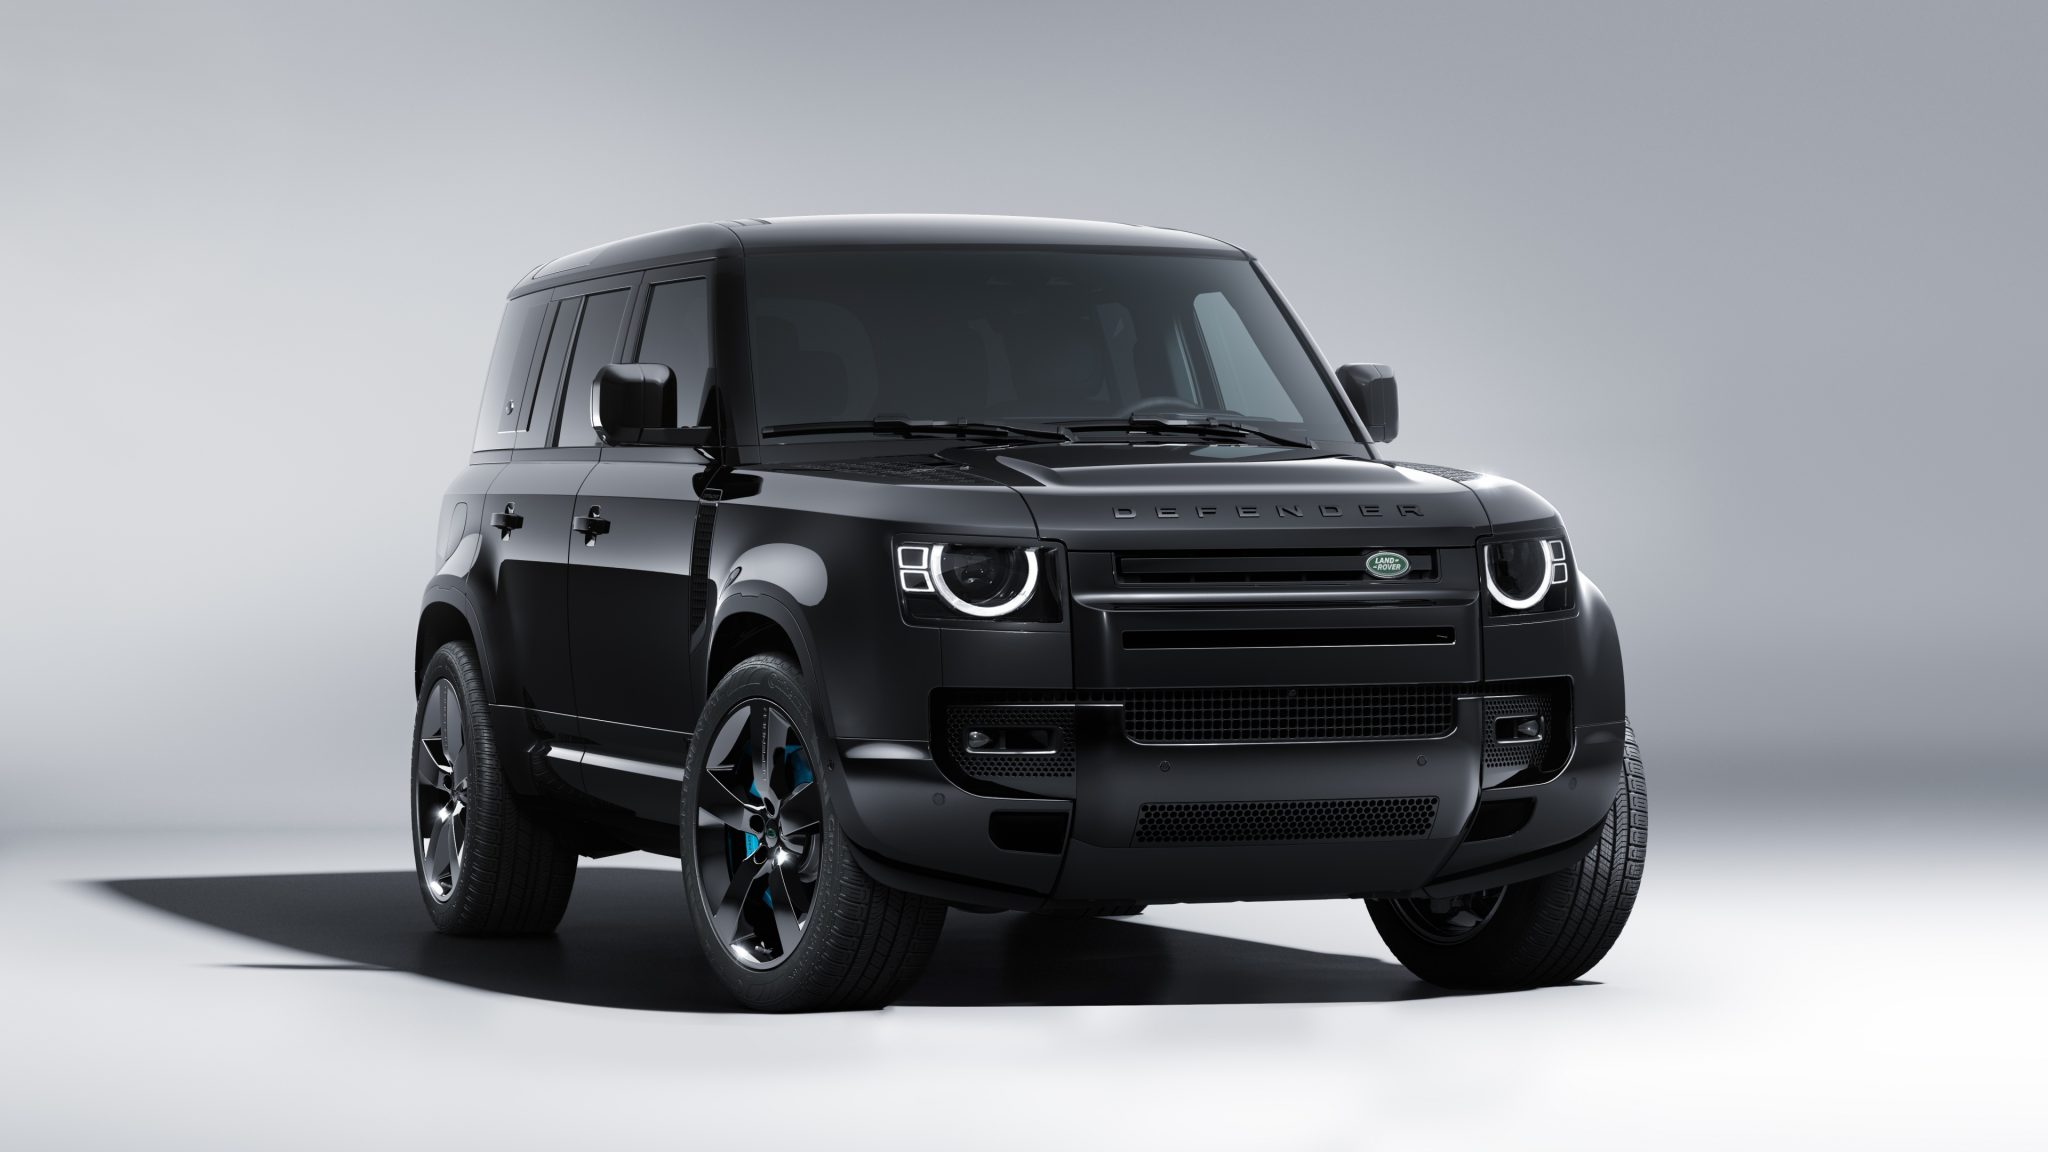 https://www.goodcarbadcar.net/wp-content/uploads/2021/01/Land-Rover-Defender-scaled.jpeg